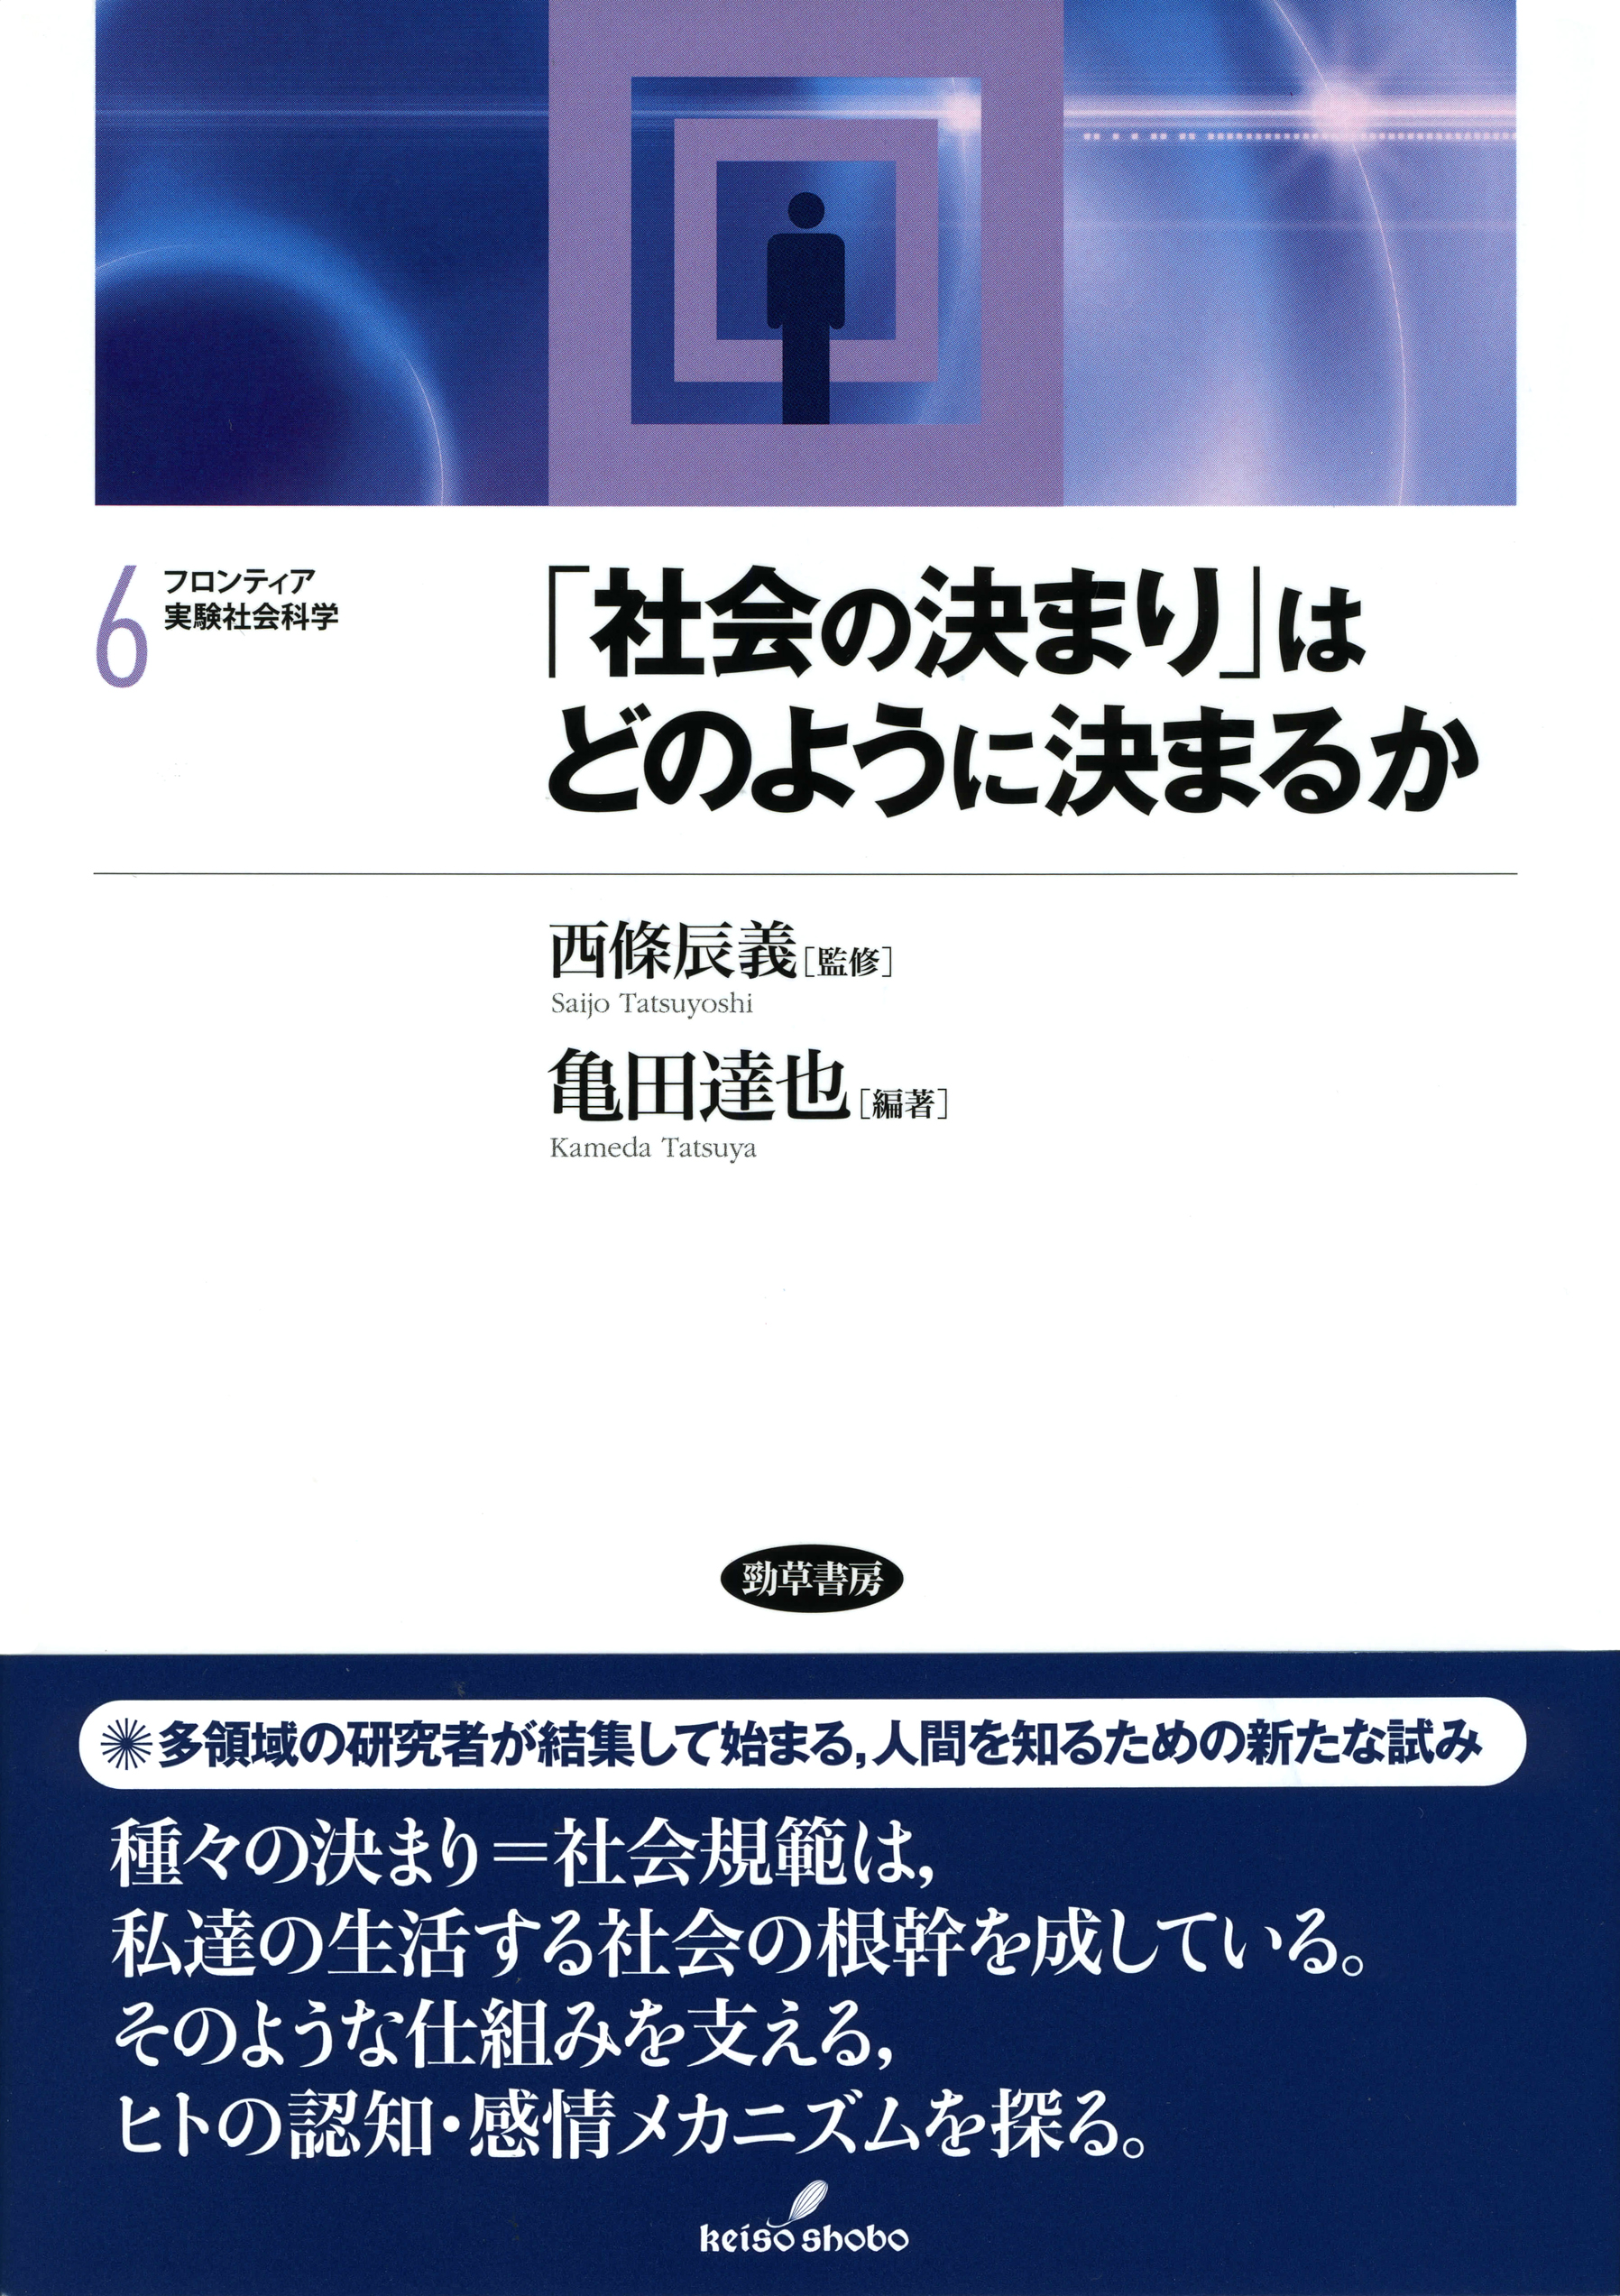 A cover with a human-shaped icon against white background and a navy blue belt that reads “new cross-disciplinary initiative to discover about human beings”